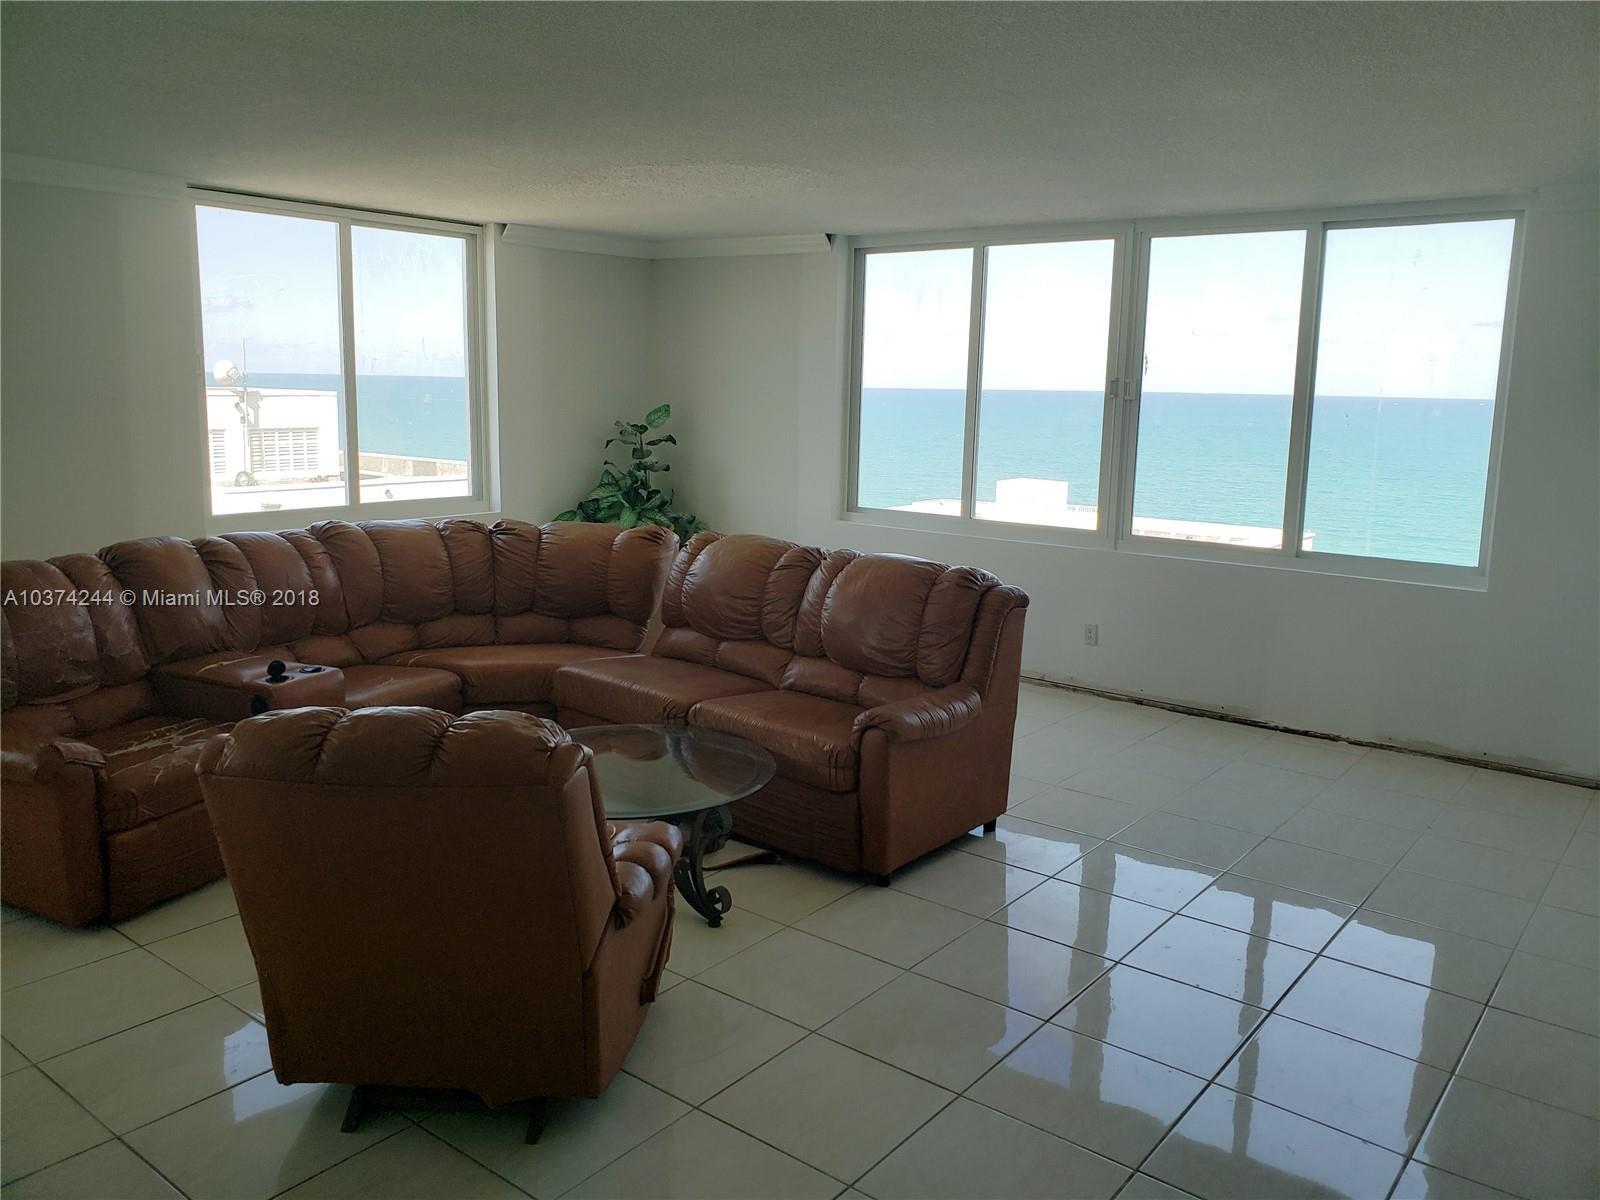 Spectacular Direct Ocean & Intracoastal views from this large 3 bedroom with the potential to a 4 Be